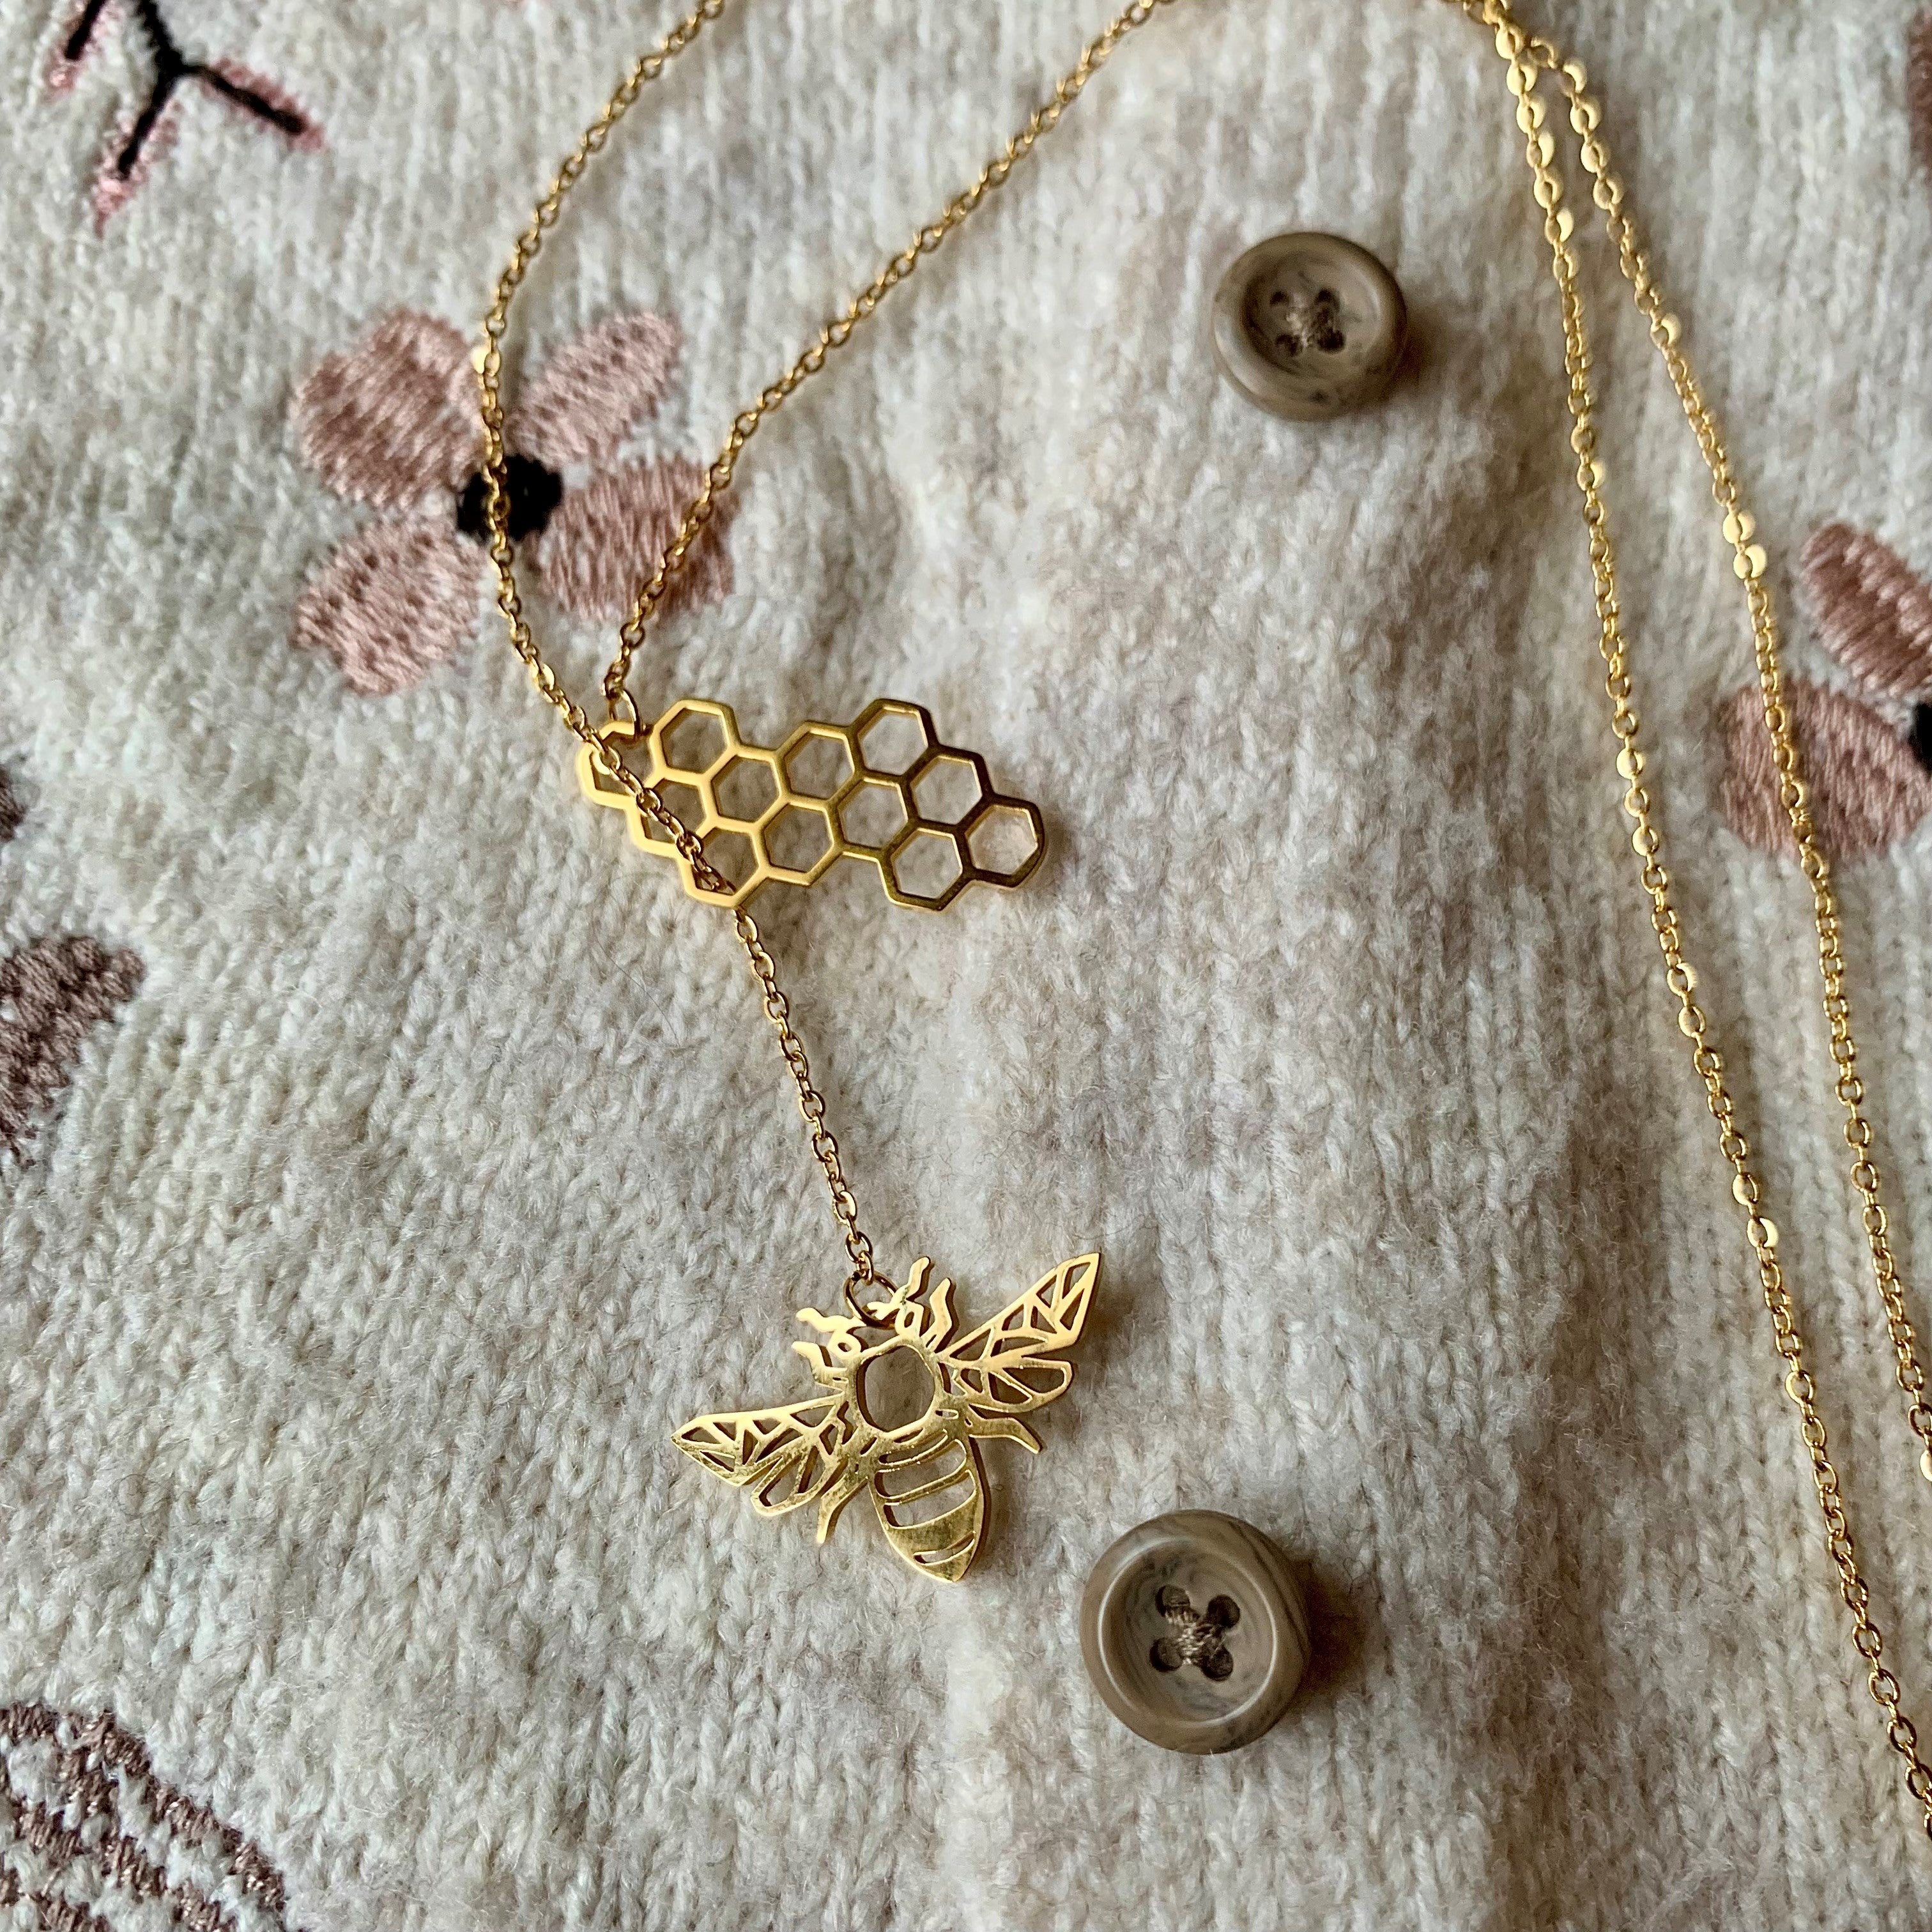 Honey Bee Necklace in Gold